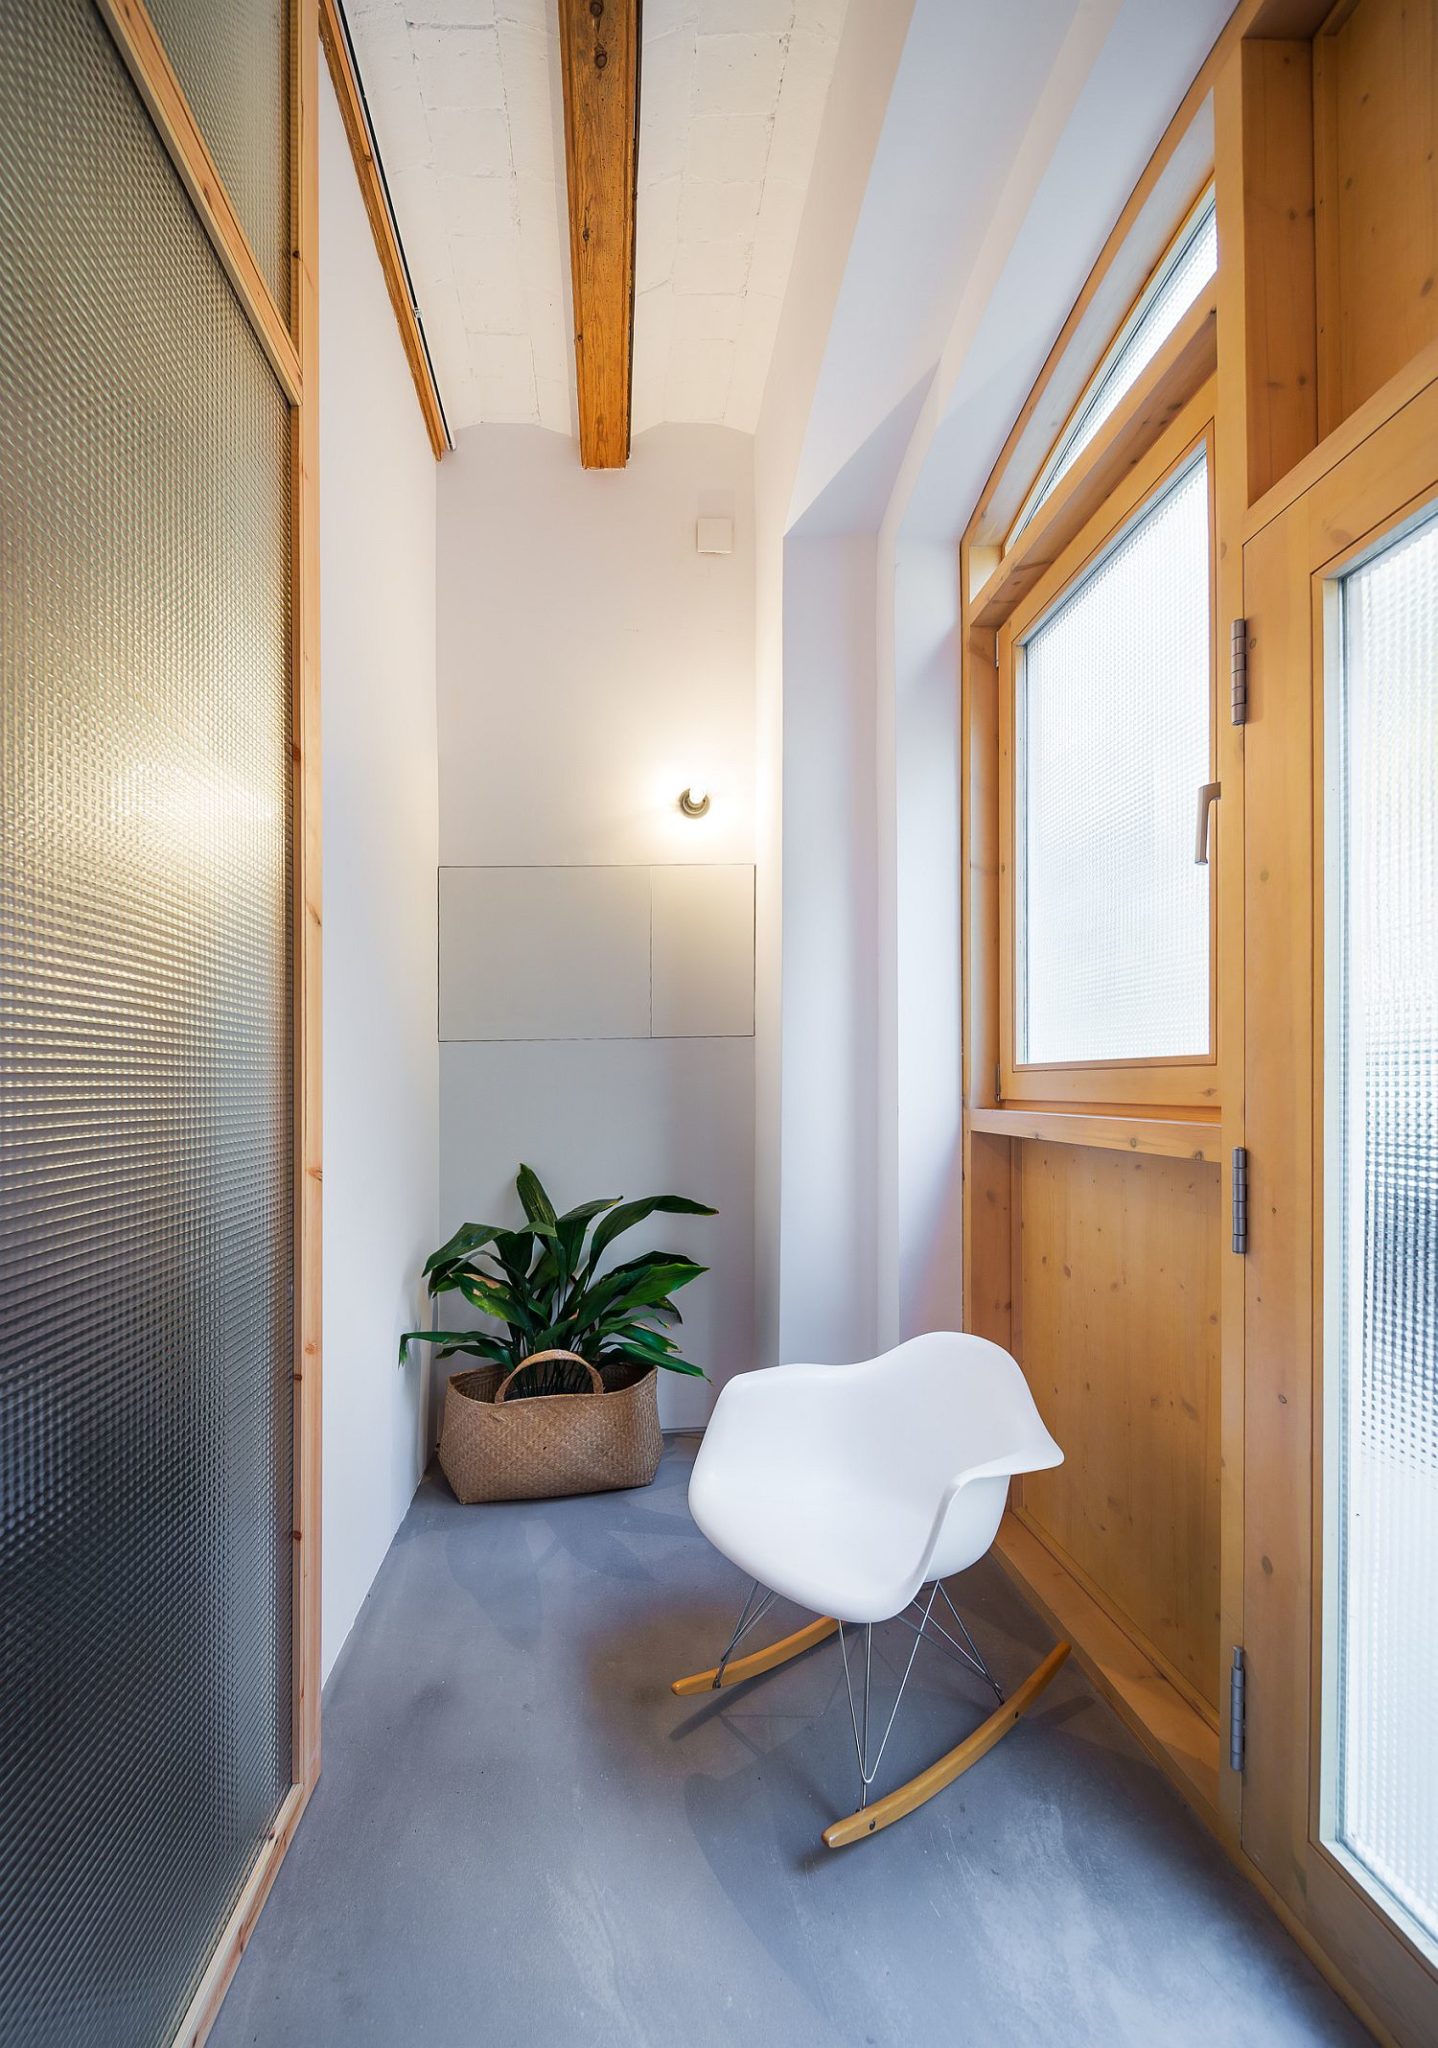 Space-savvy-deisgn-of-the-apartment-produces-a-fabulous-hallway